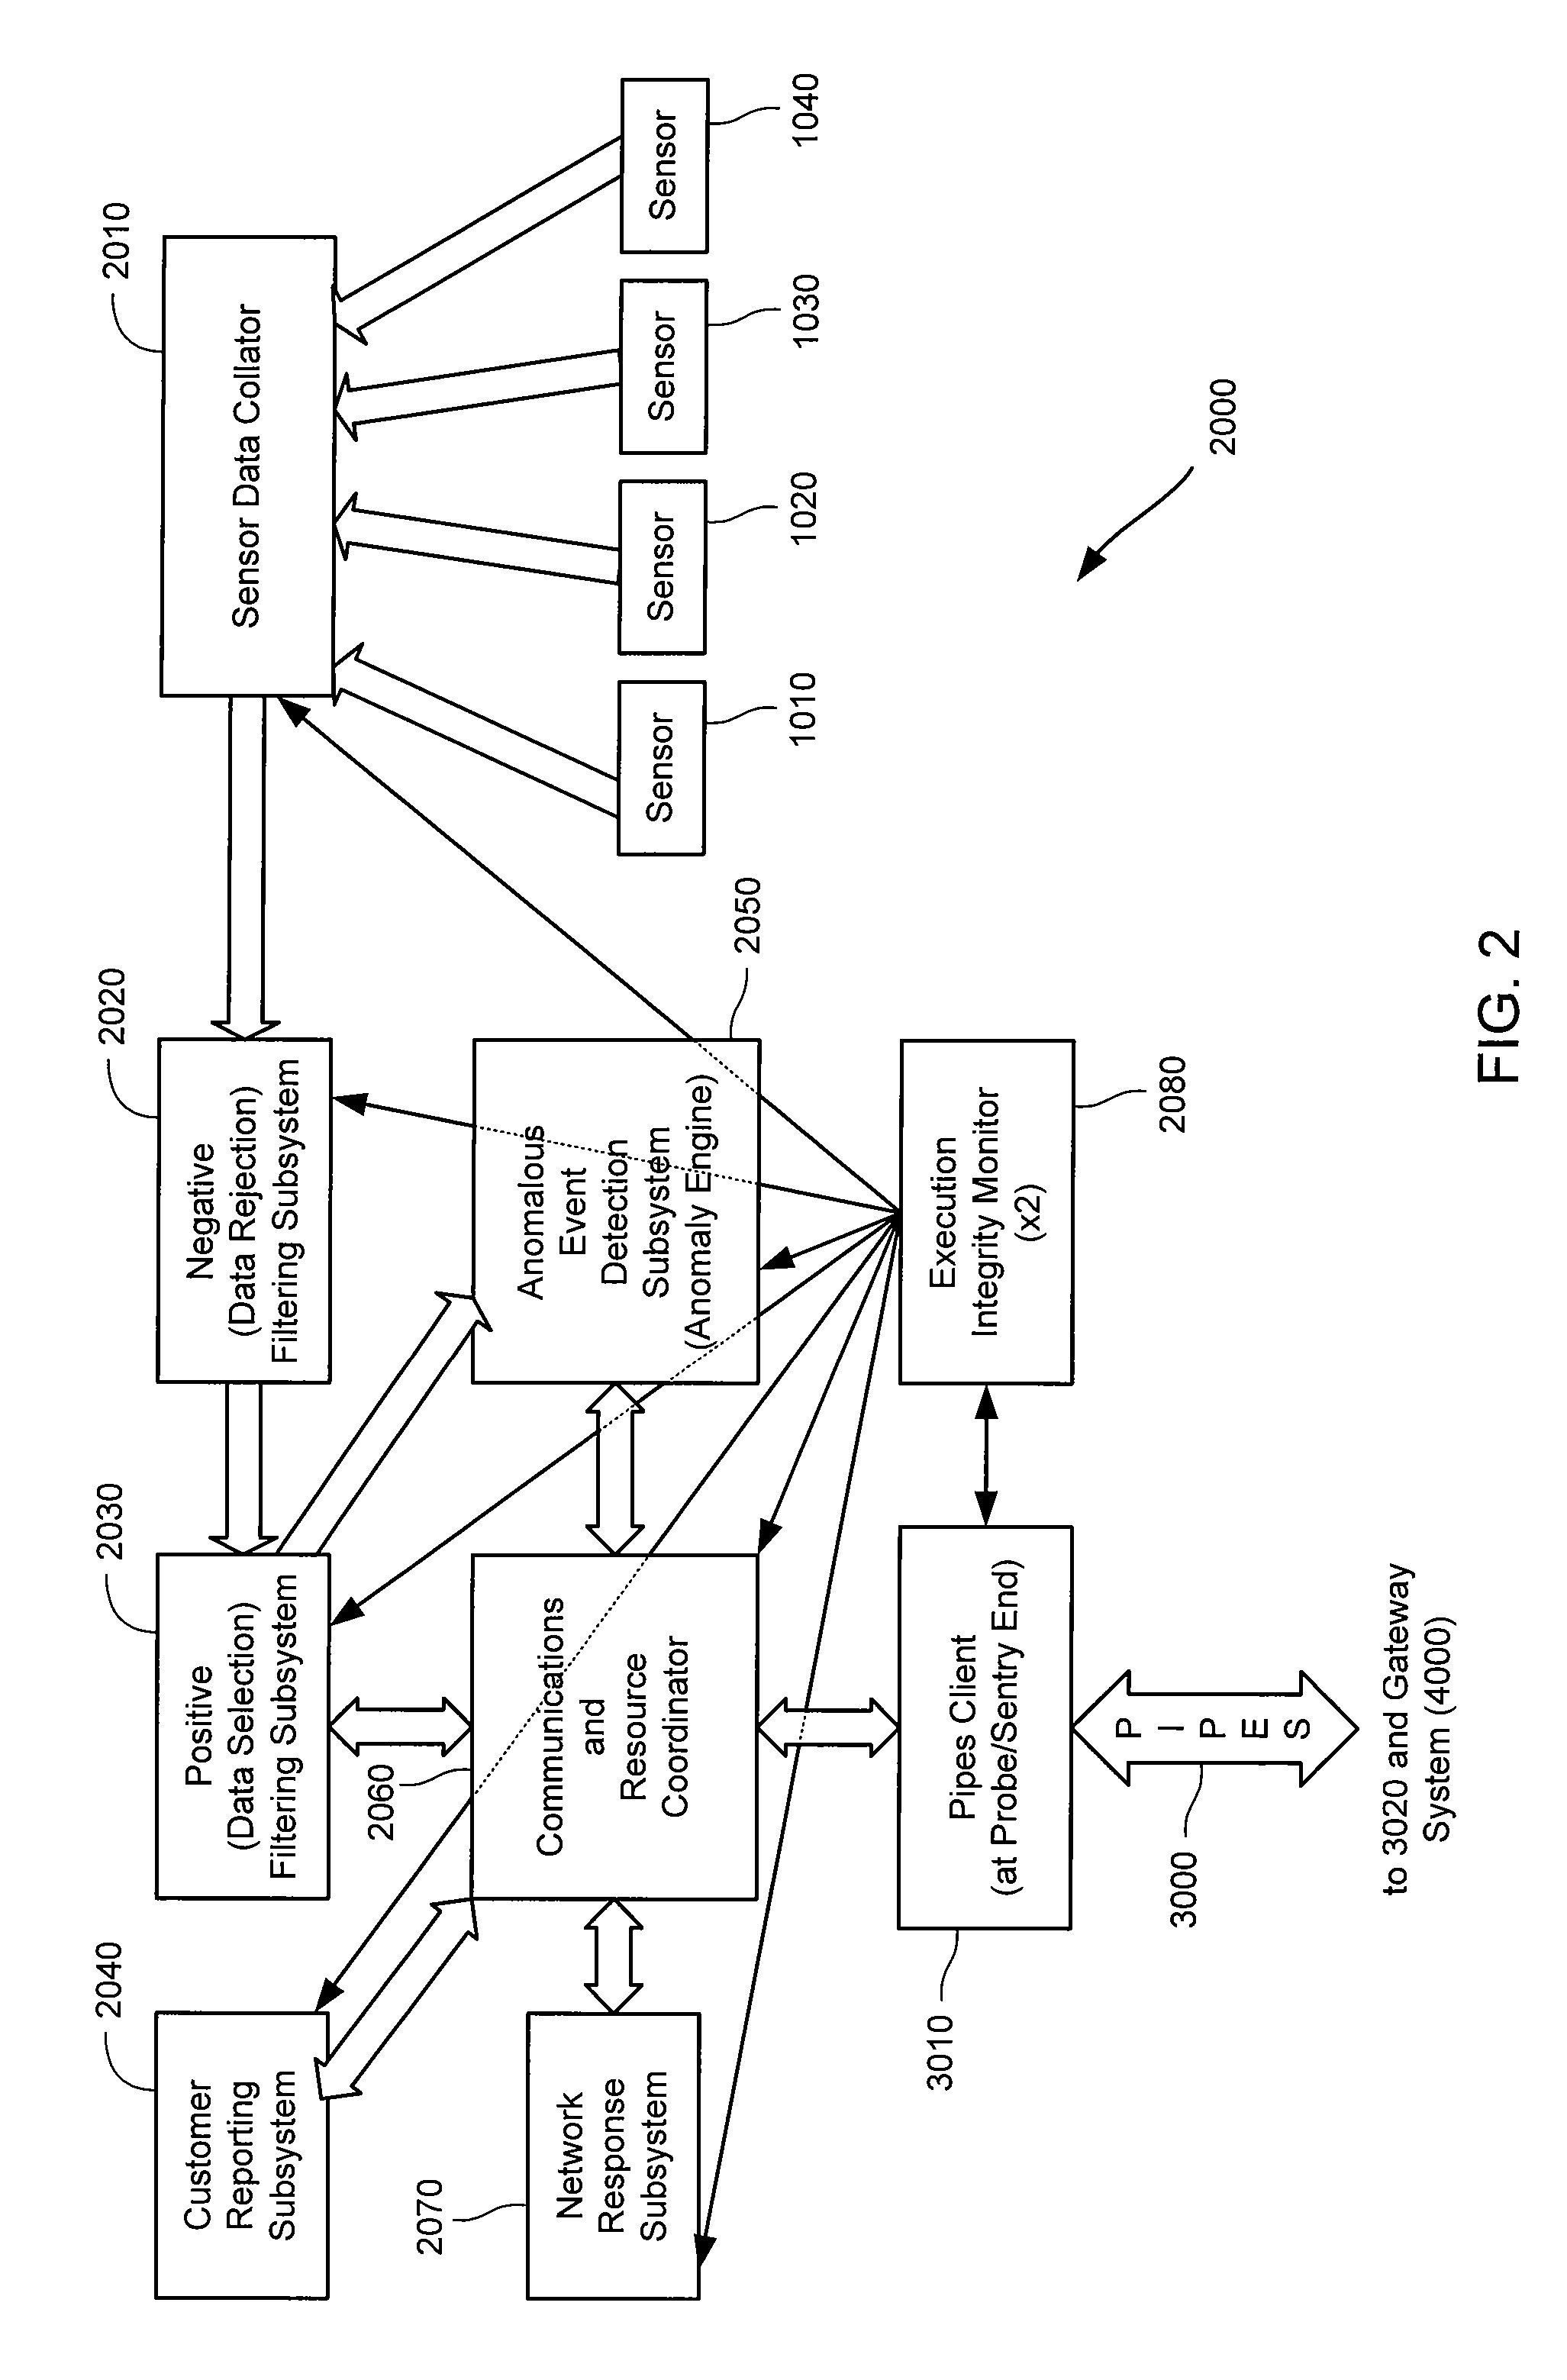 Method and System for Dynamic Network Intrusion Monitoring, Detection and Response